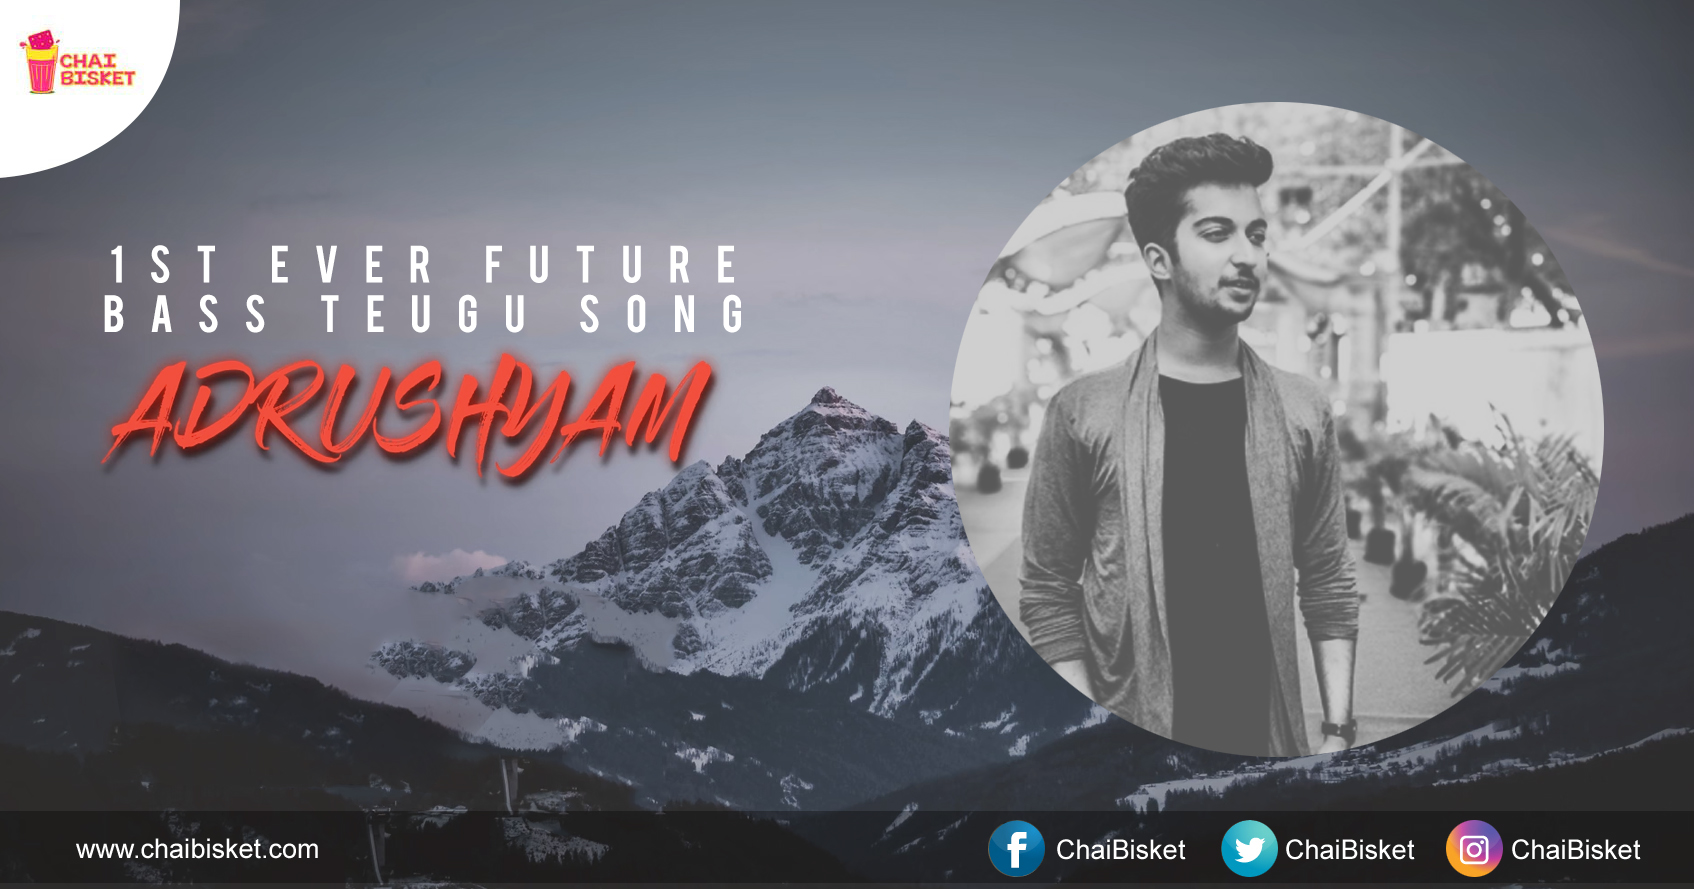 Every Music Lover Should Checkout Adhrushyam The First Ever Future Bass Song In Telugu Chai Bisket